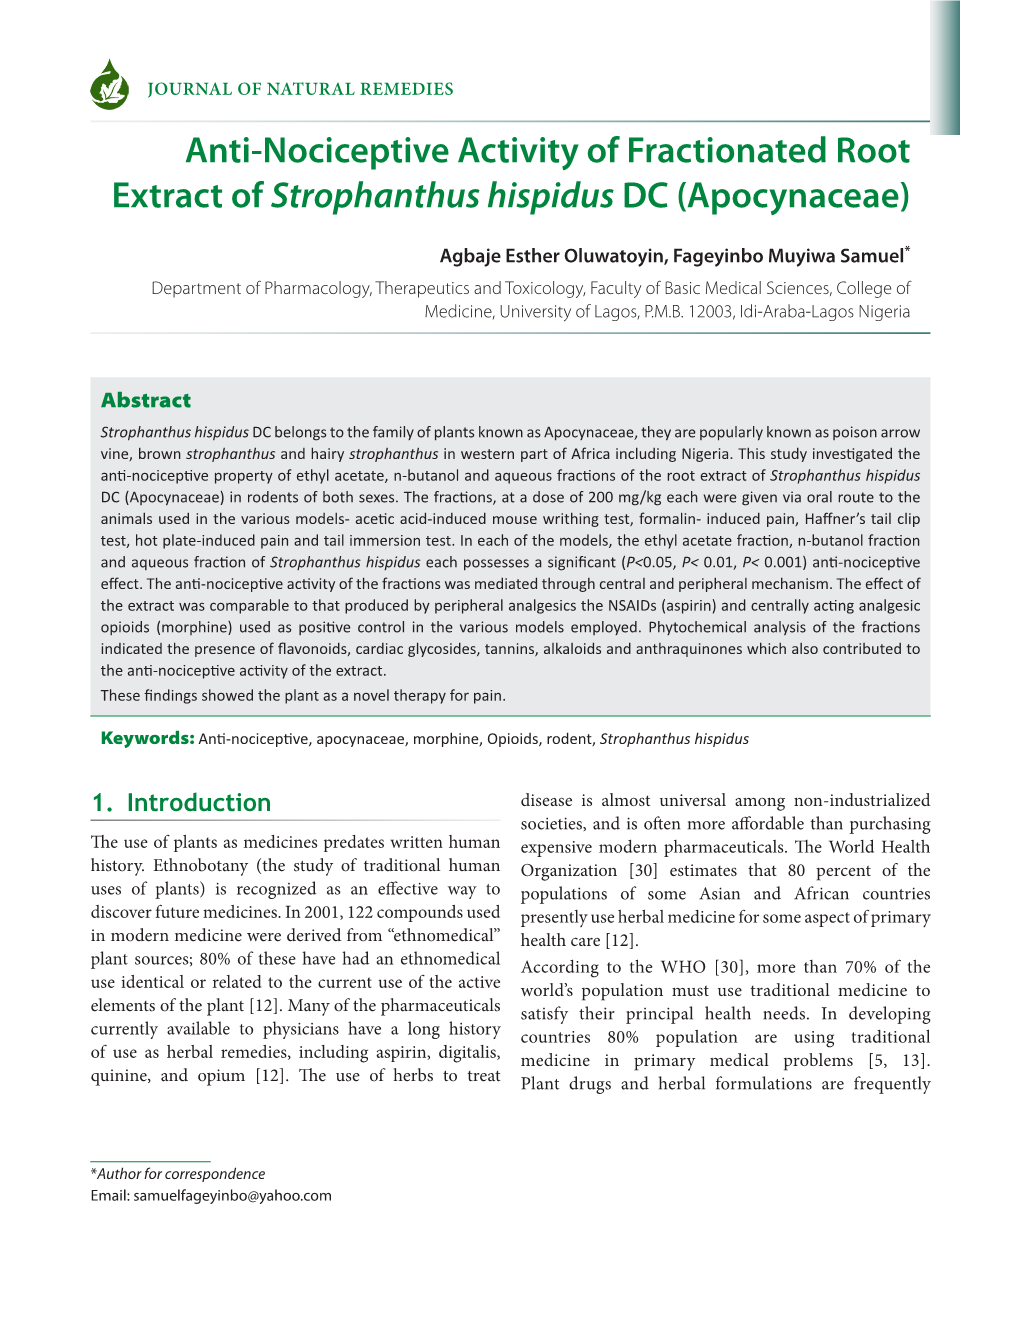 Anti-Nociceptive Activity of Fractionated Root Extract of Strophanthus Hispidus DC (Apocynaceae)